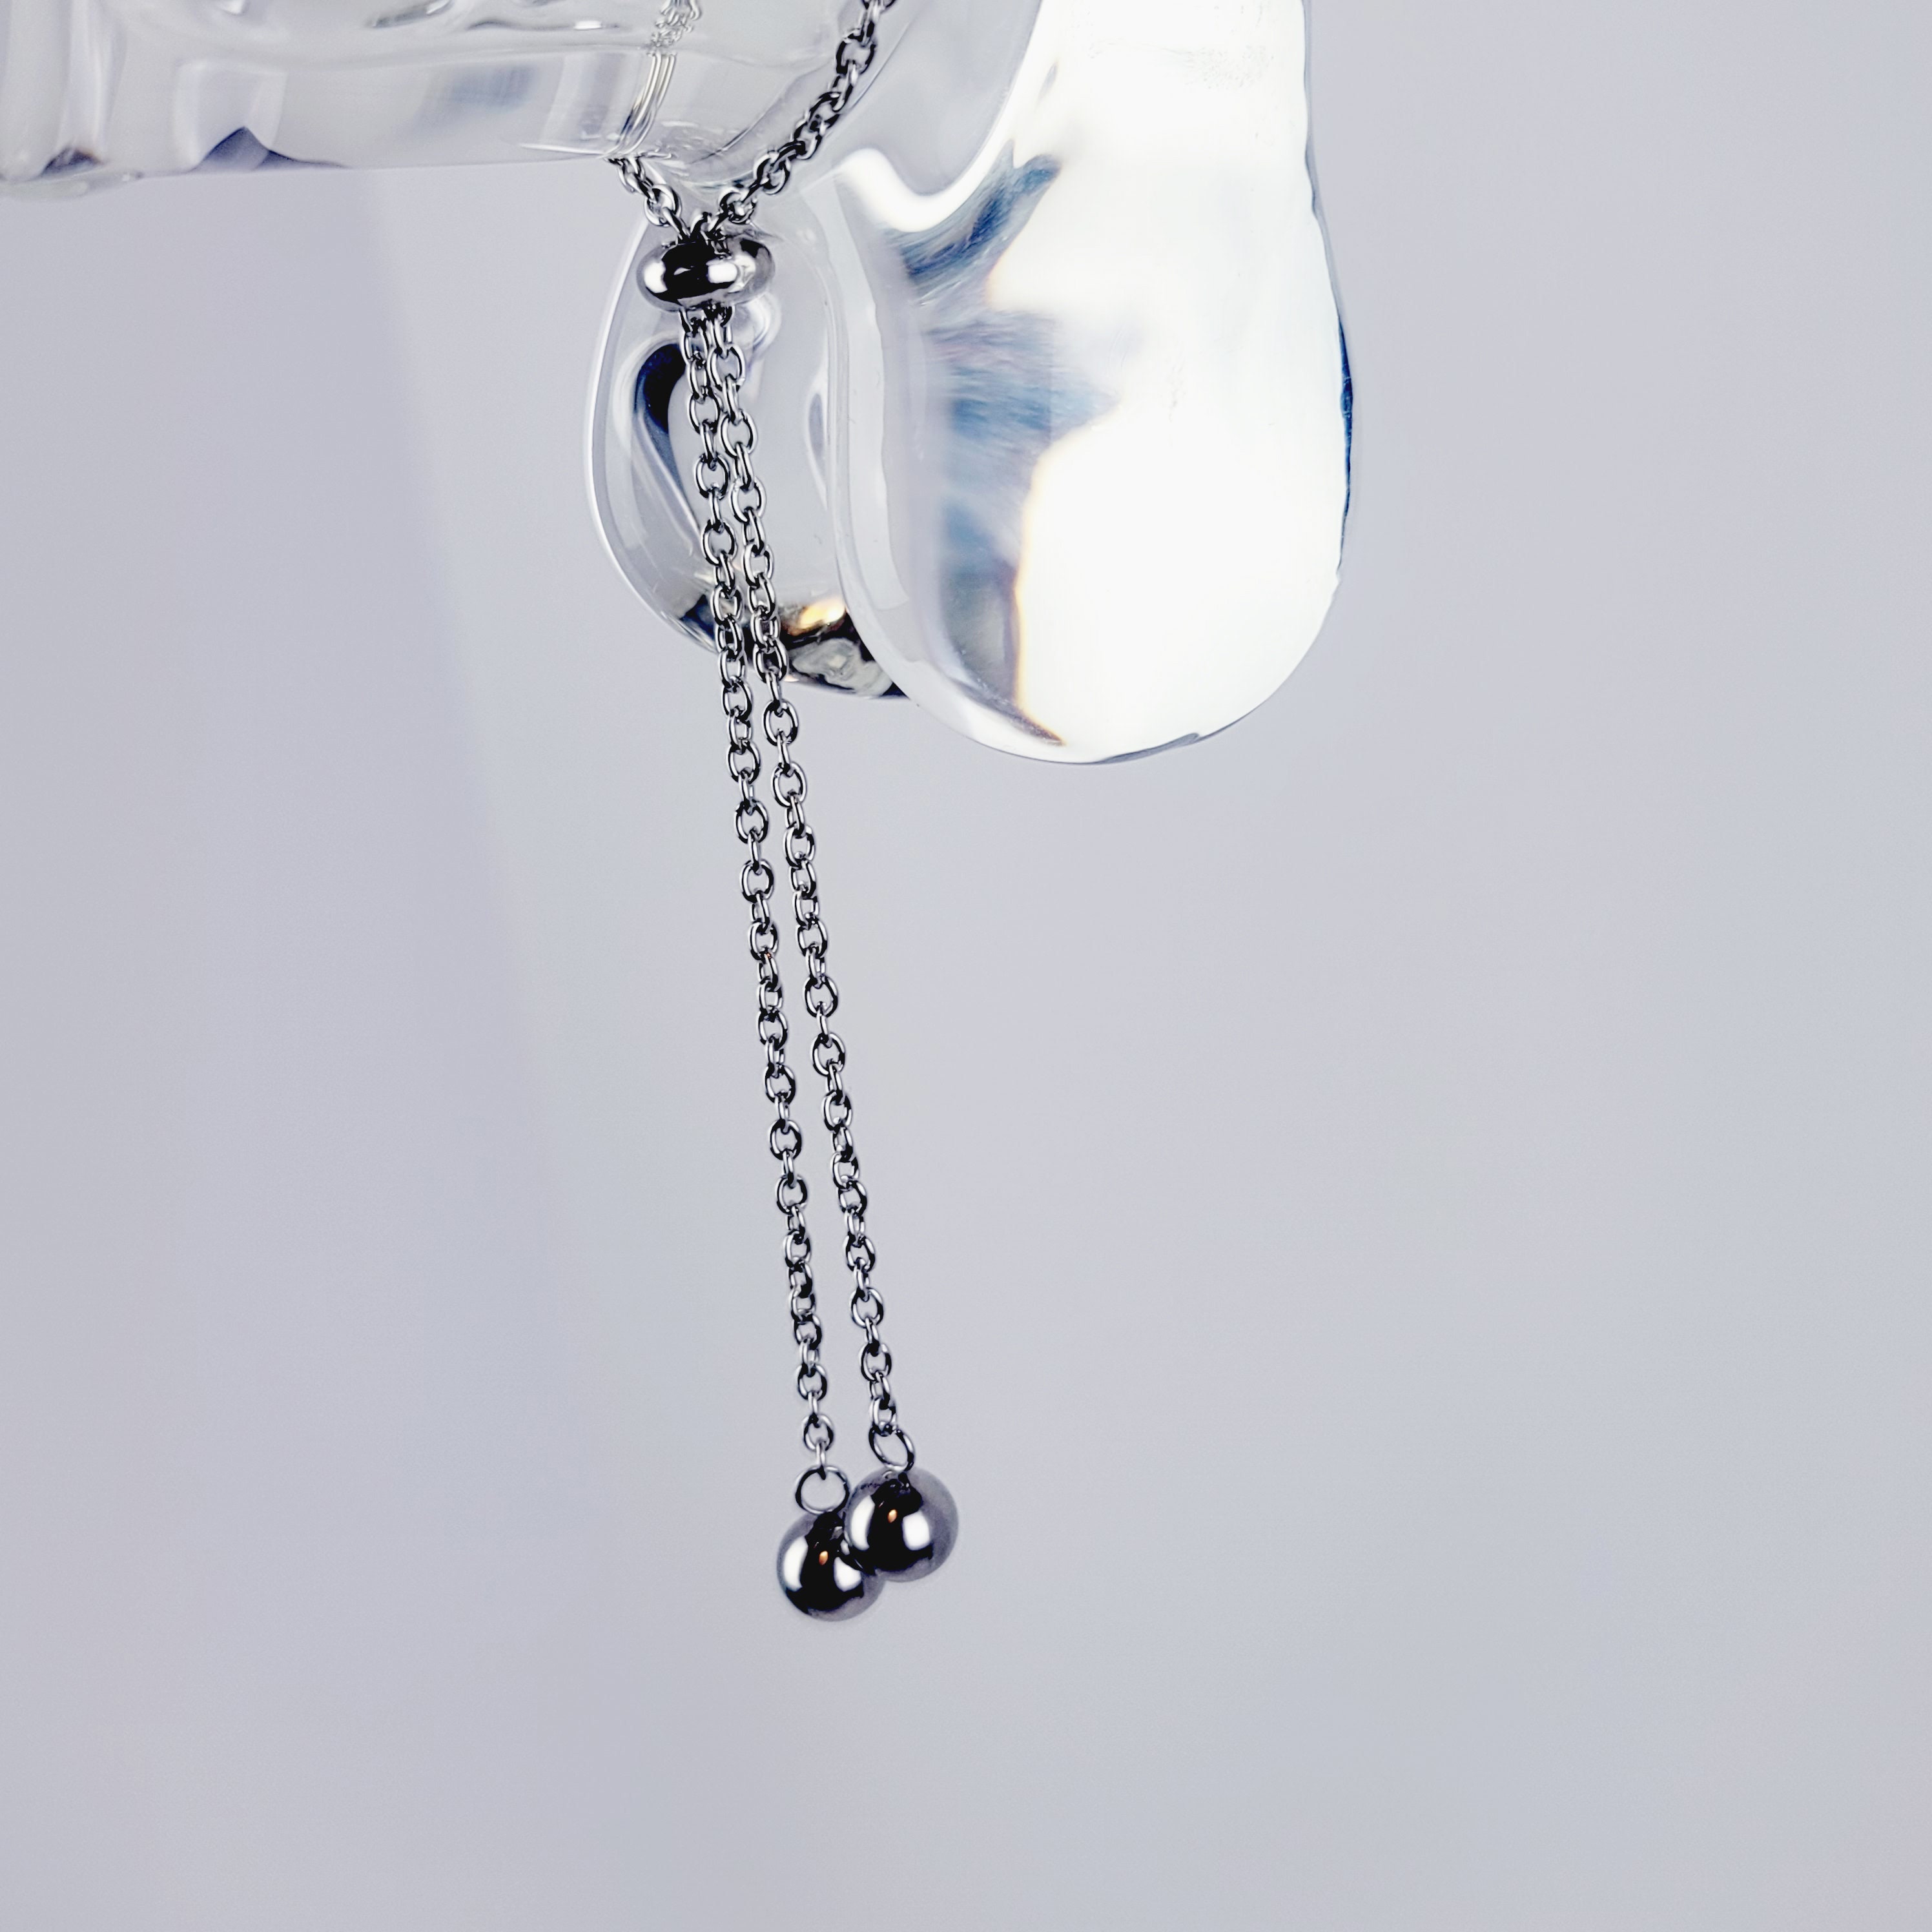 Penis Chain Noose with Weighted Balls. BDSM and Lifestyle Jewelry for Men. MATURE photo